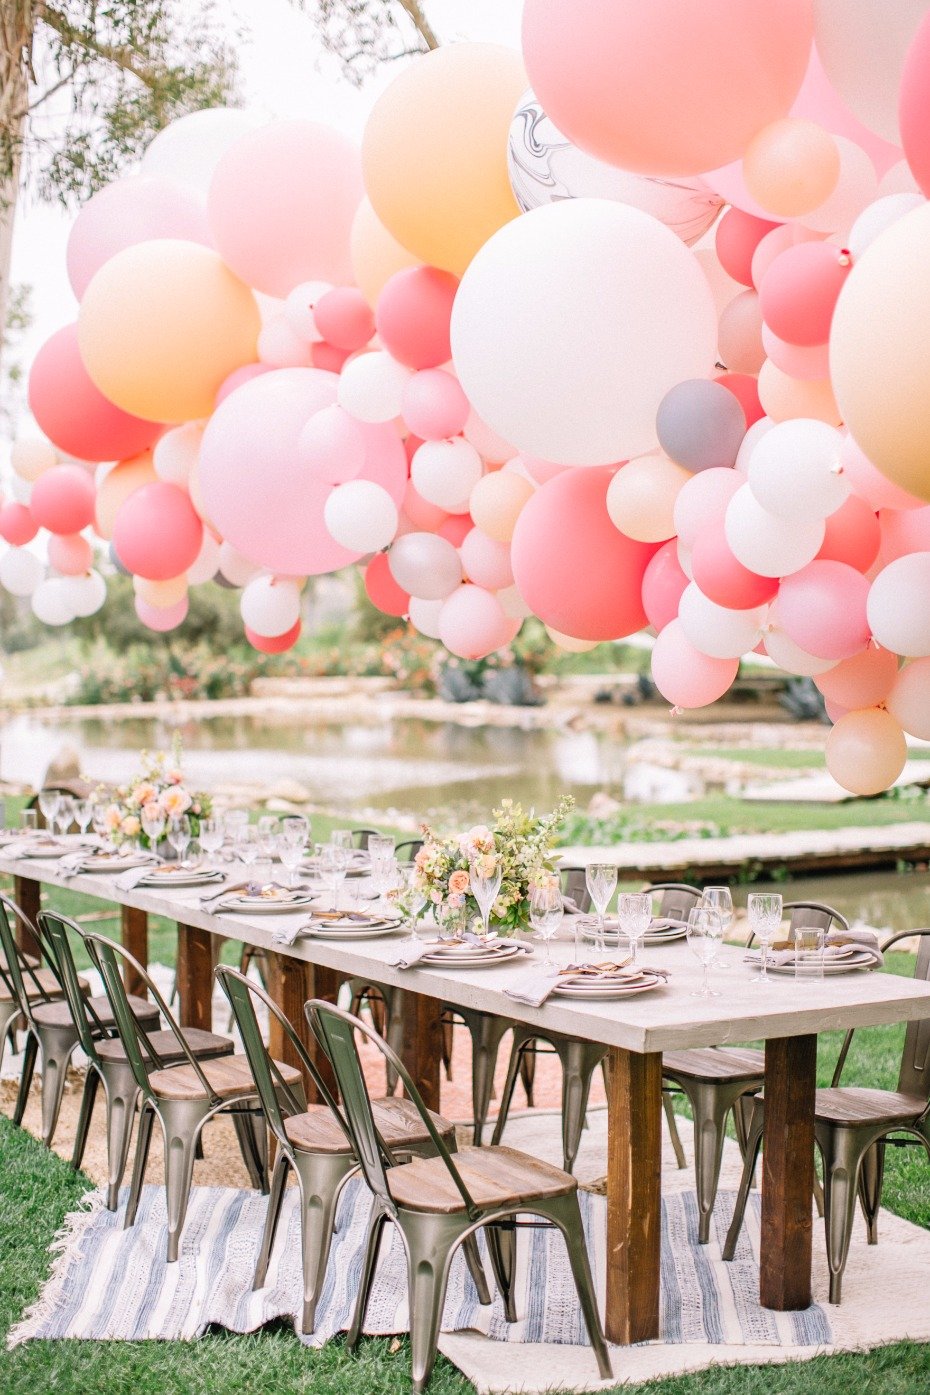 Modern chic table with giant balloon installation